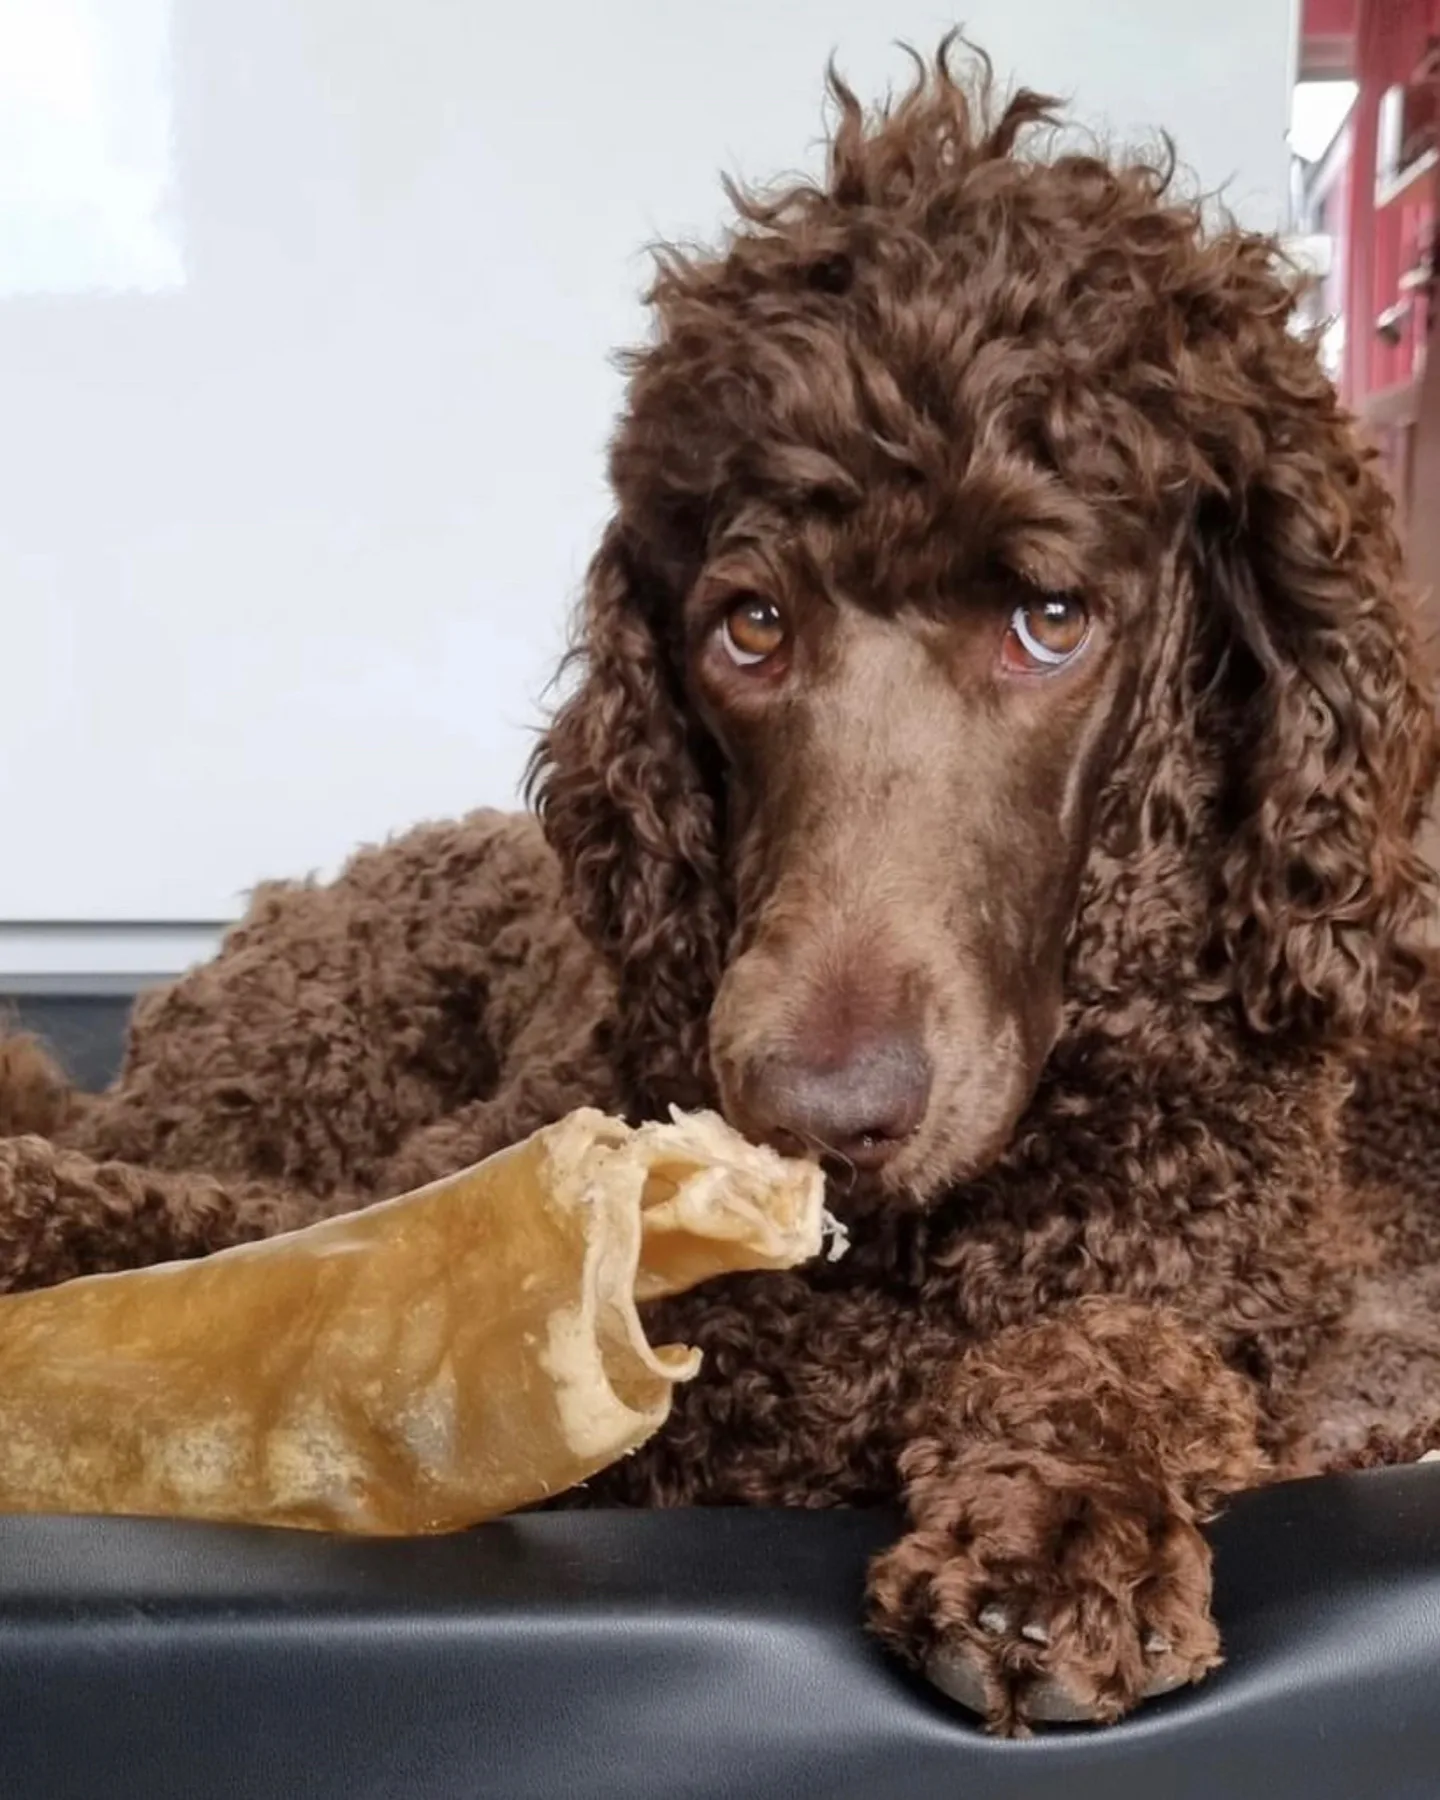 A brown Poodle chewing on her treat while her owner wonders how much is a brown Poodle